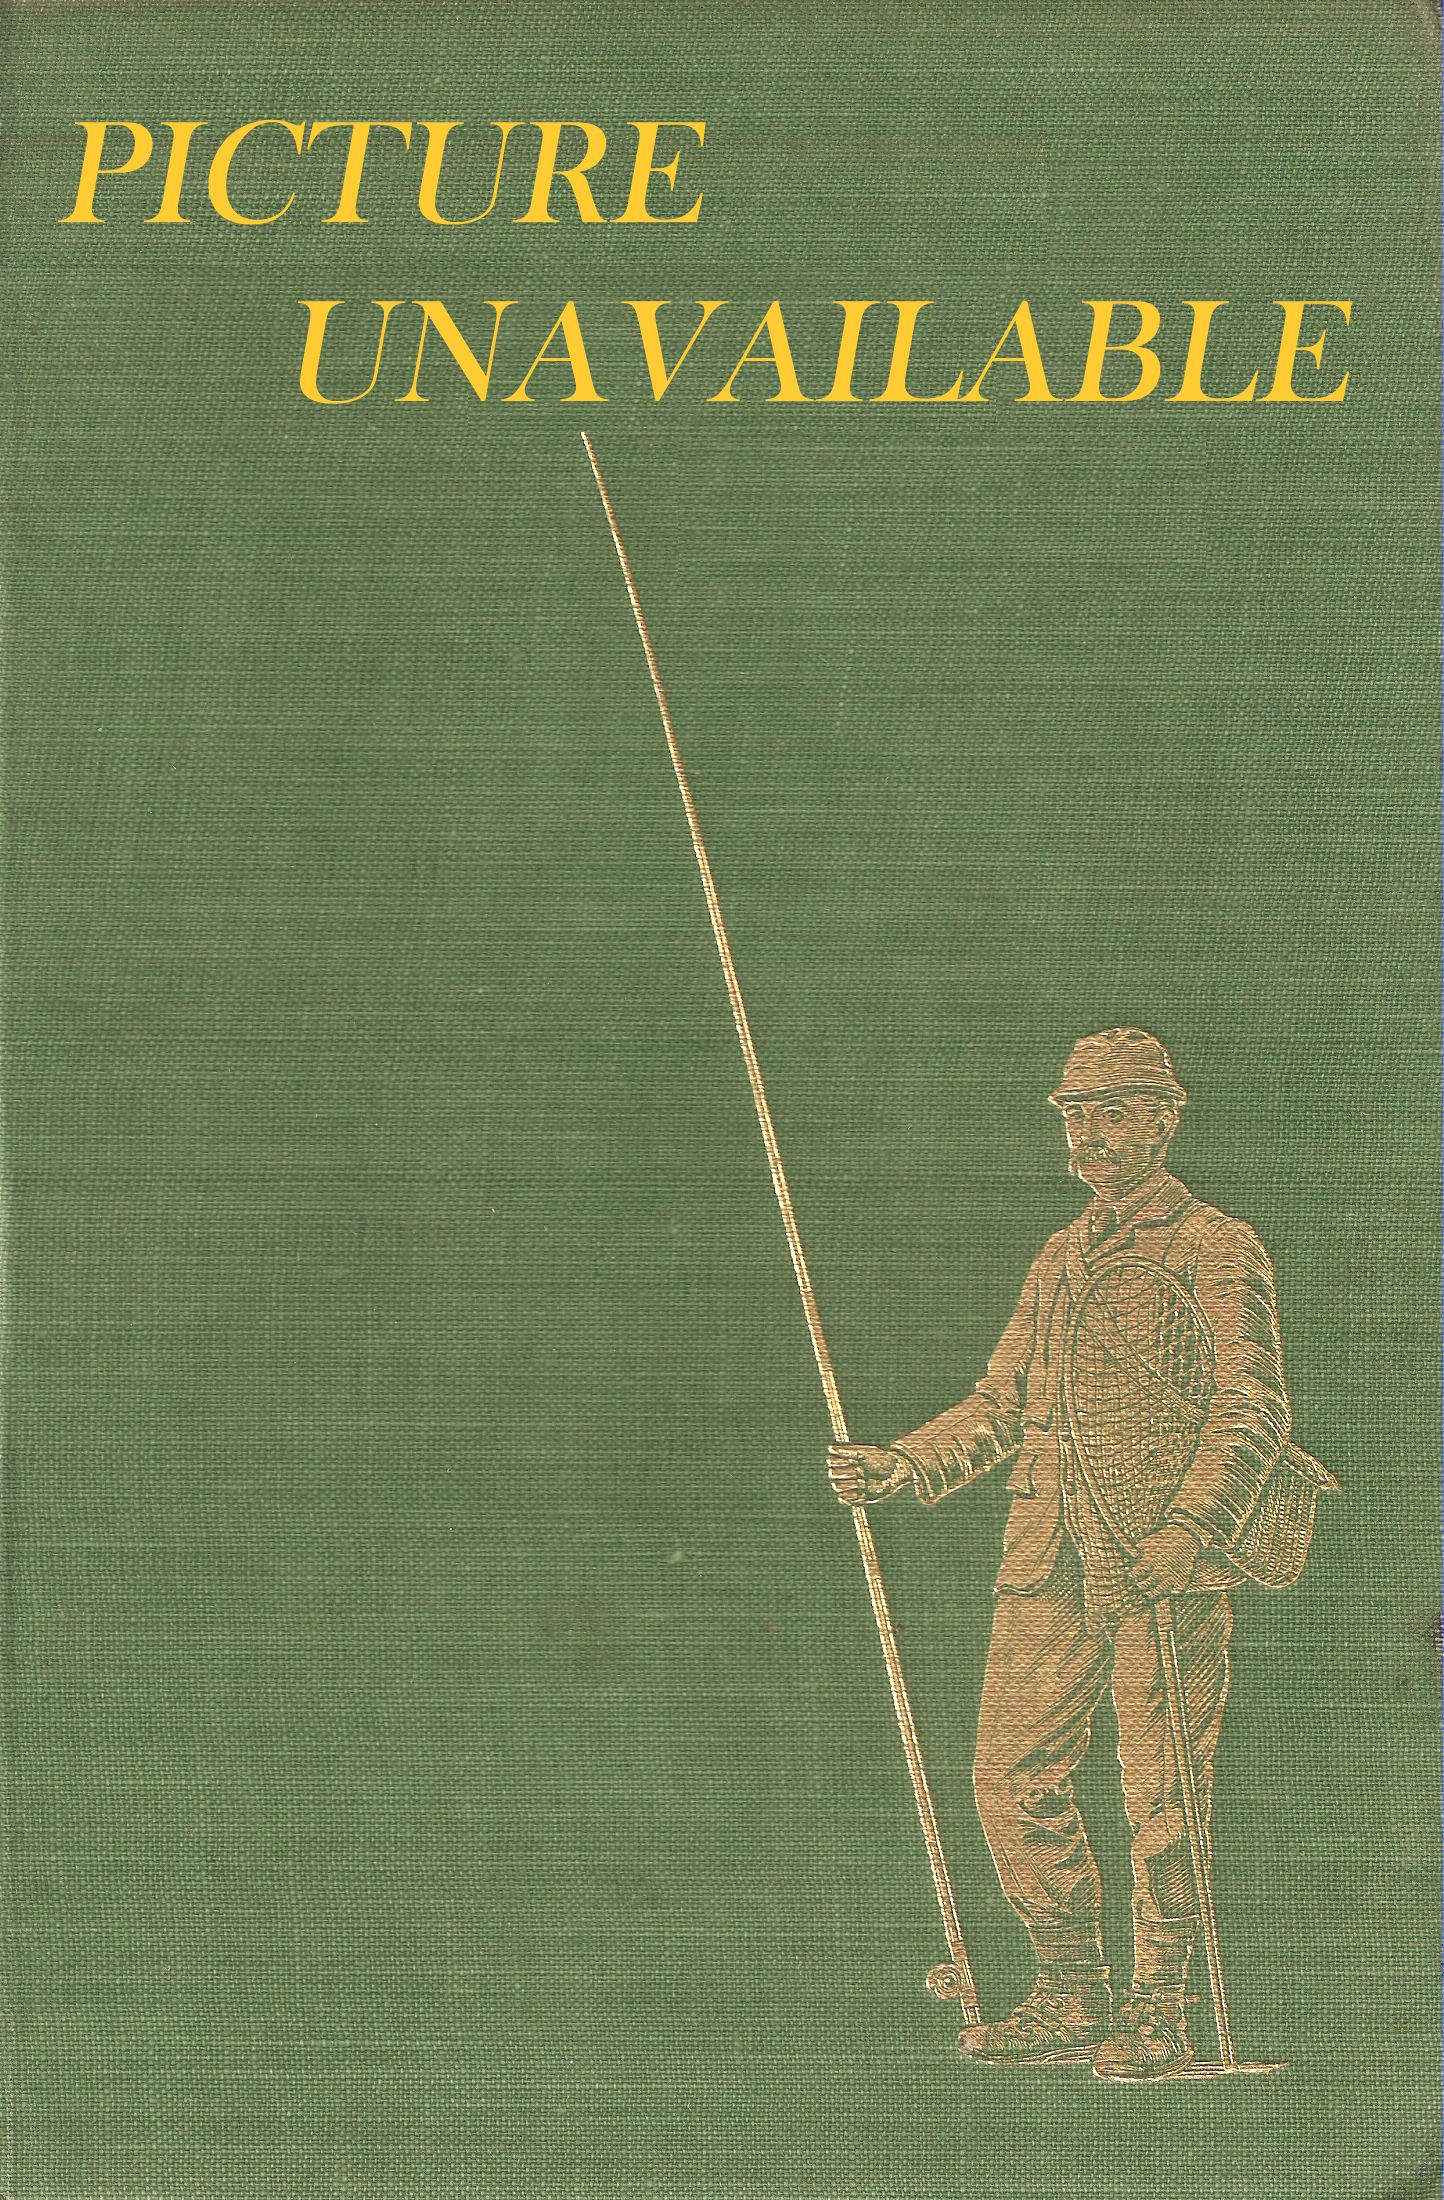 ANGLING IN AMERICA: ITS EARLY HISTORY AND LITERATURE. By Charles Eliot  Goodspeed.